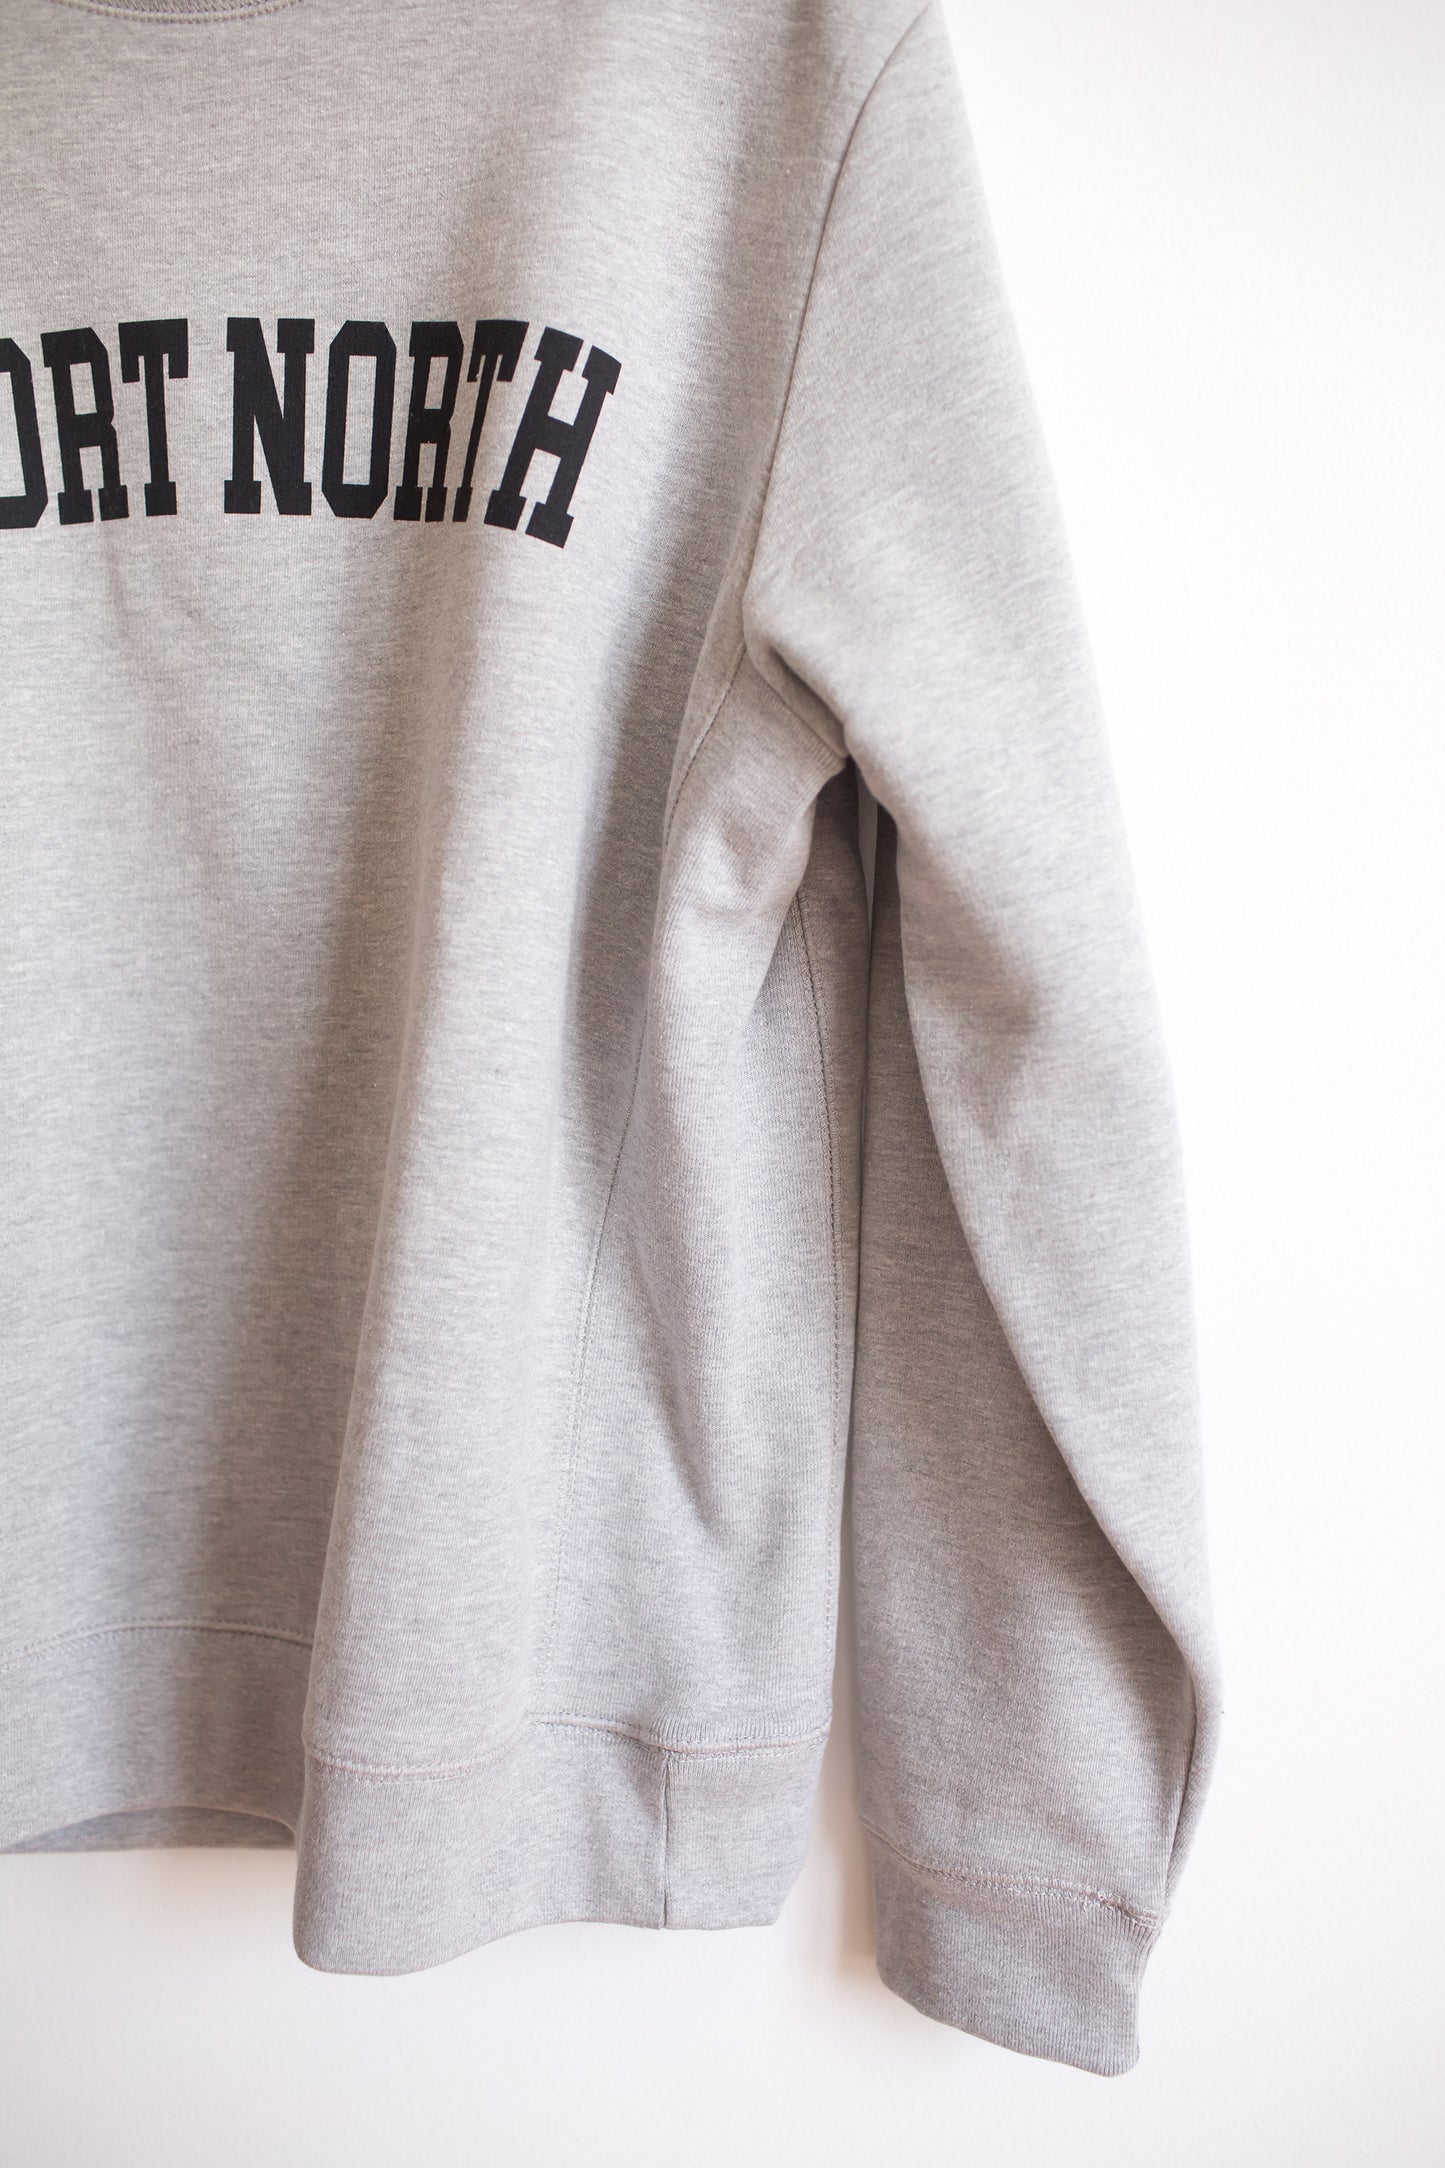 Ribbed side detail of heather grey crewneck sweatshirt with Short North graphic at front.